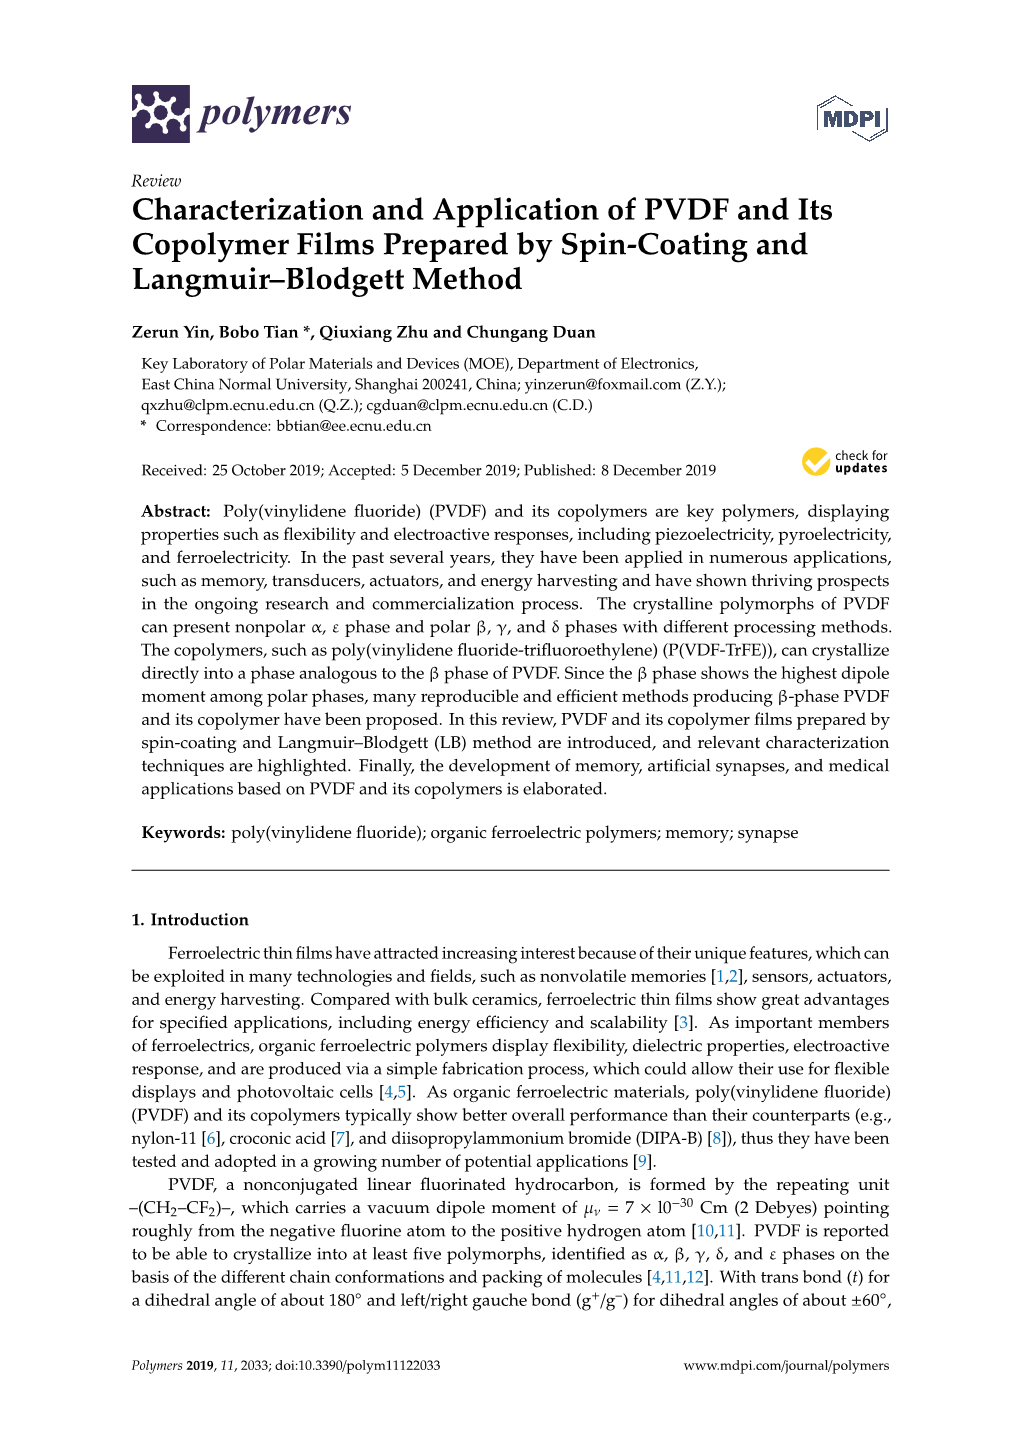 Characterization and Application of PVDF and Its Copolymer Films Prepared by Spin-Coating and Langmuir–Blodgett Method